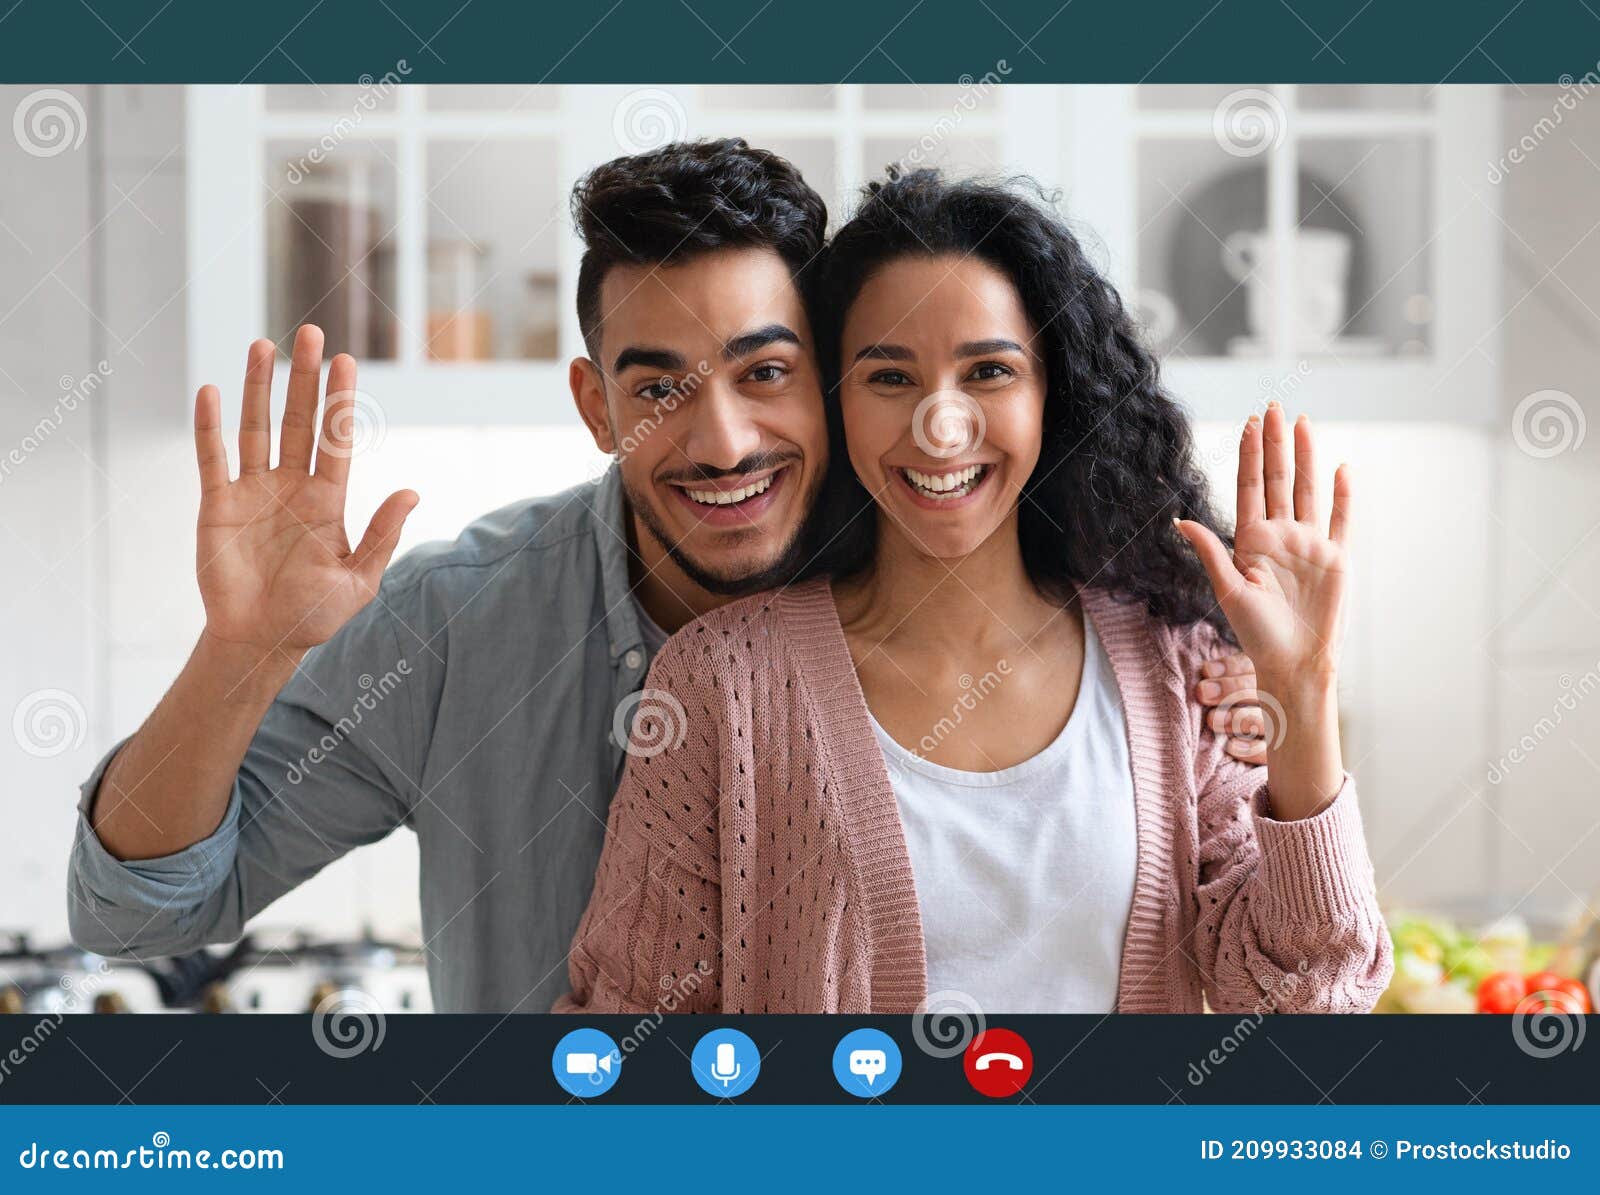 happy arab couple making video call with laptop in kitchen interior, screenshot